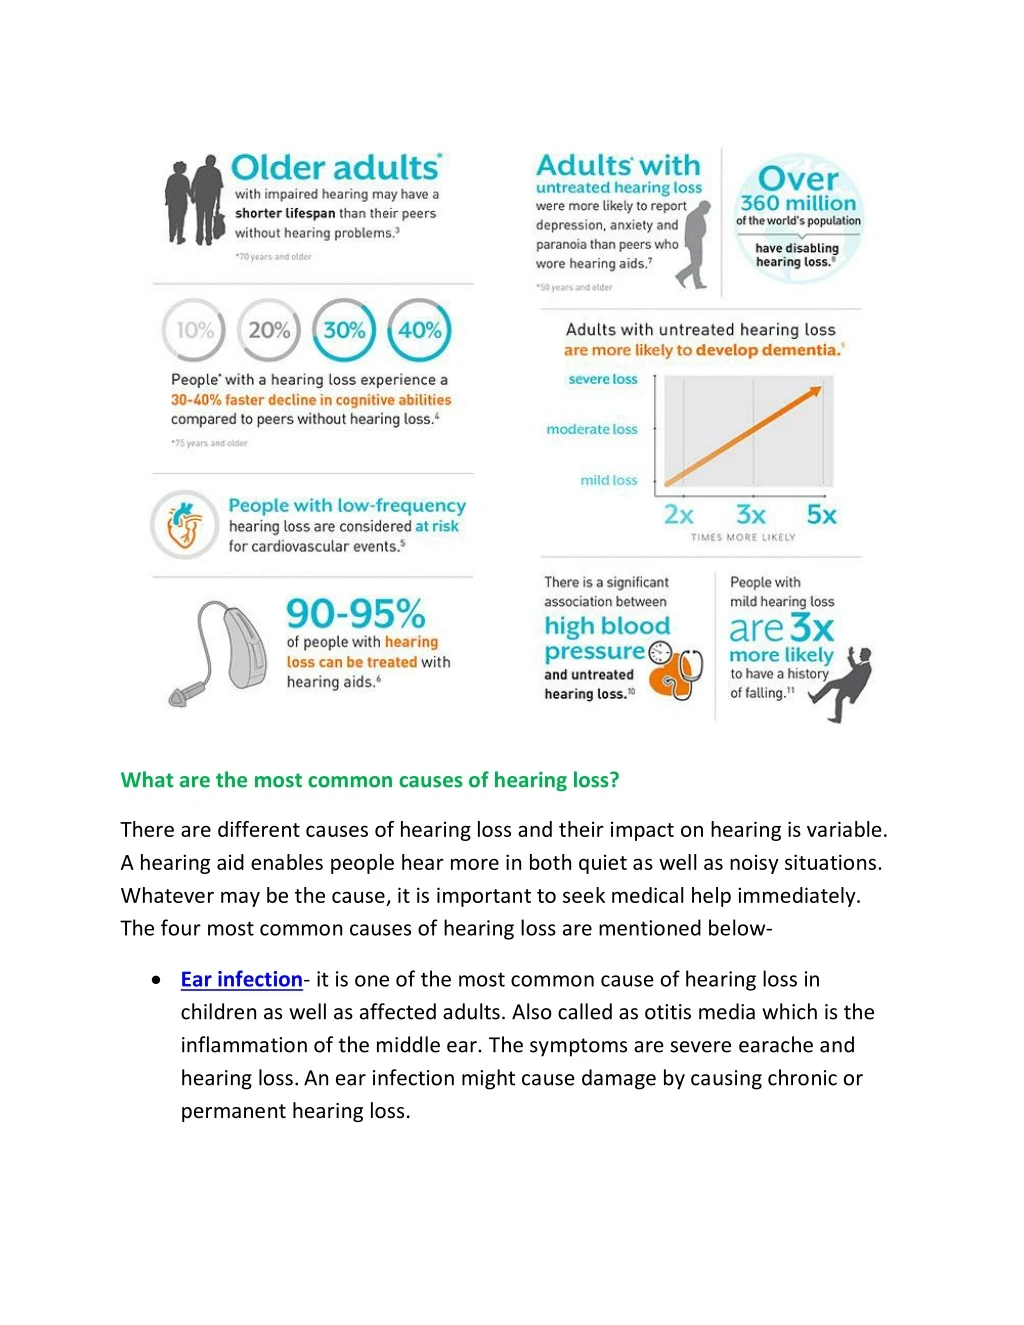 what are the most common causes of hearing loss